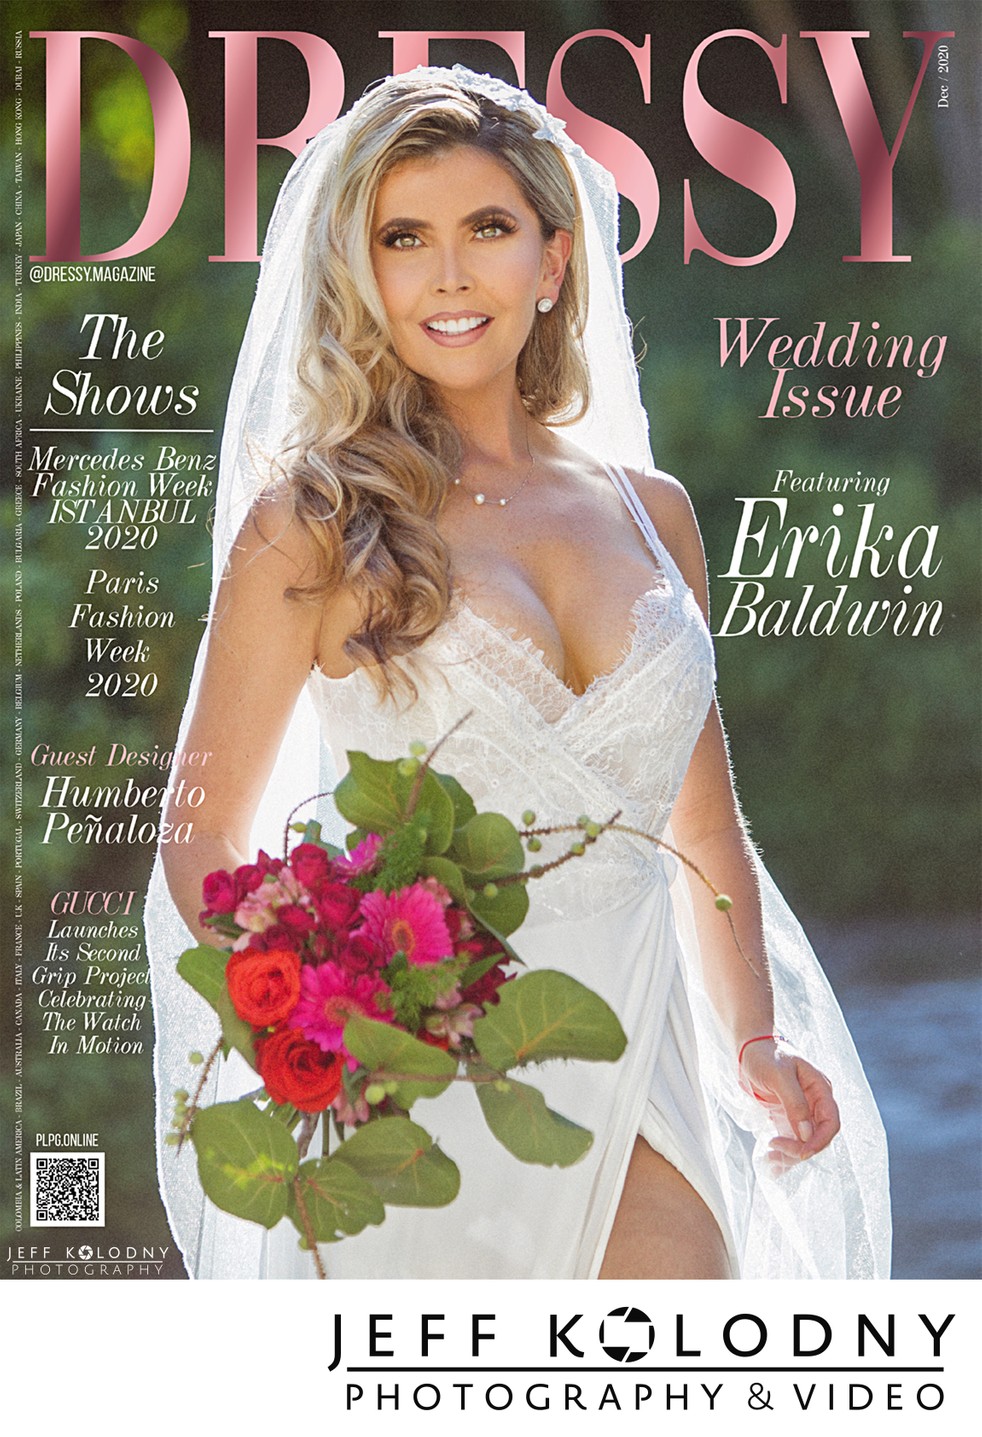 Magazine cover from a South Florida wedding.